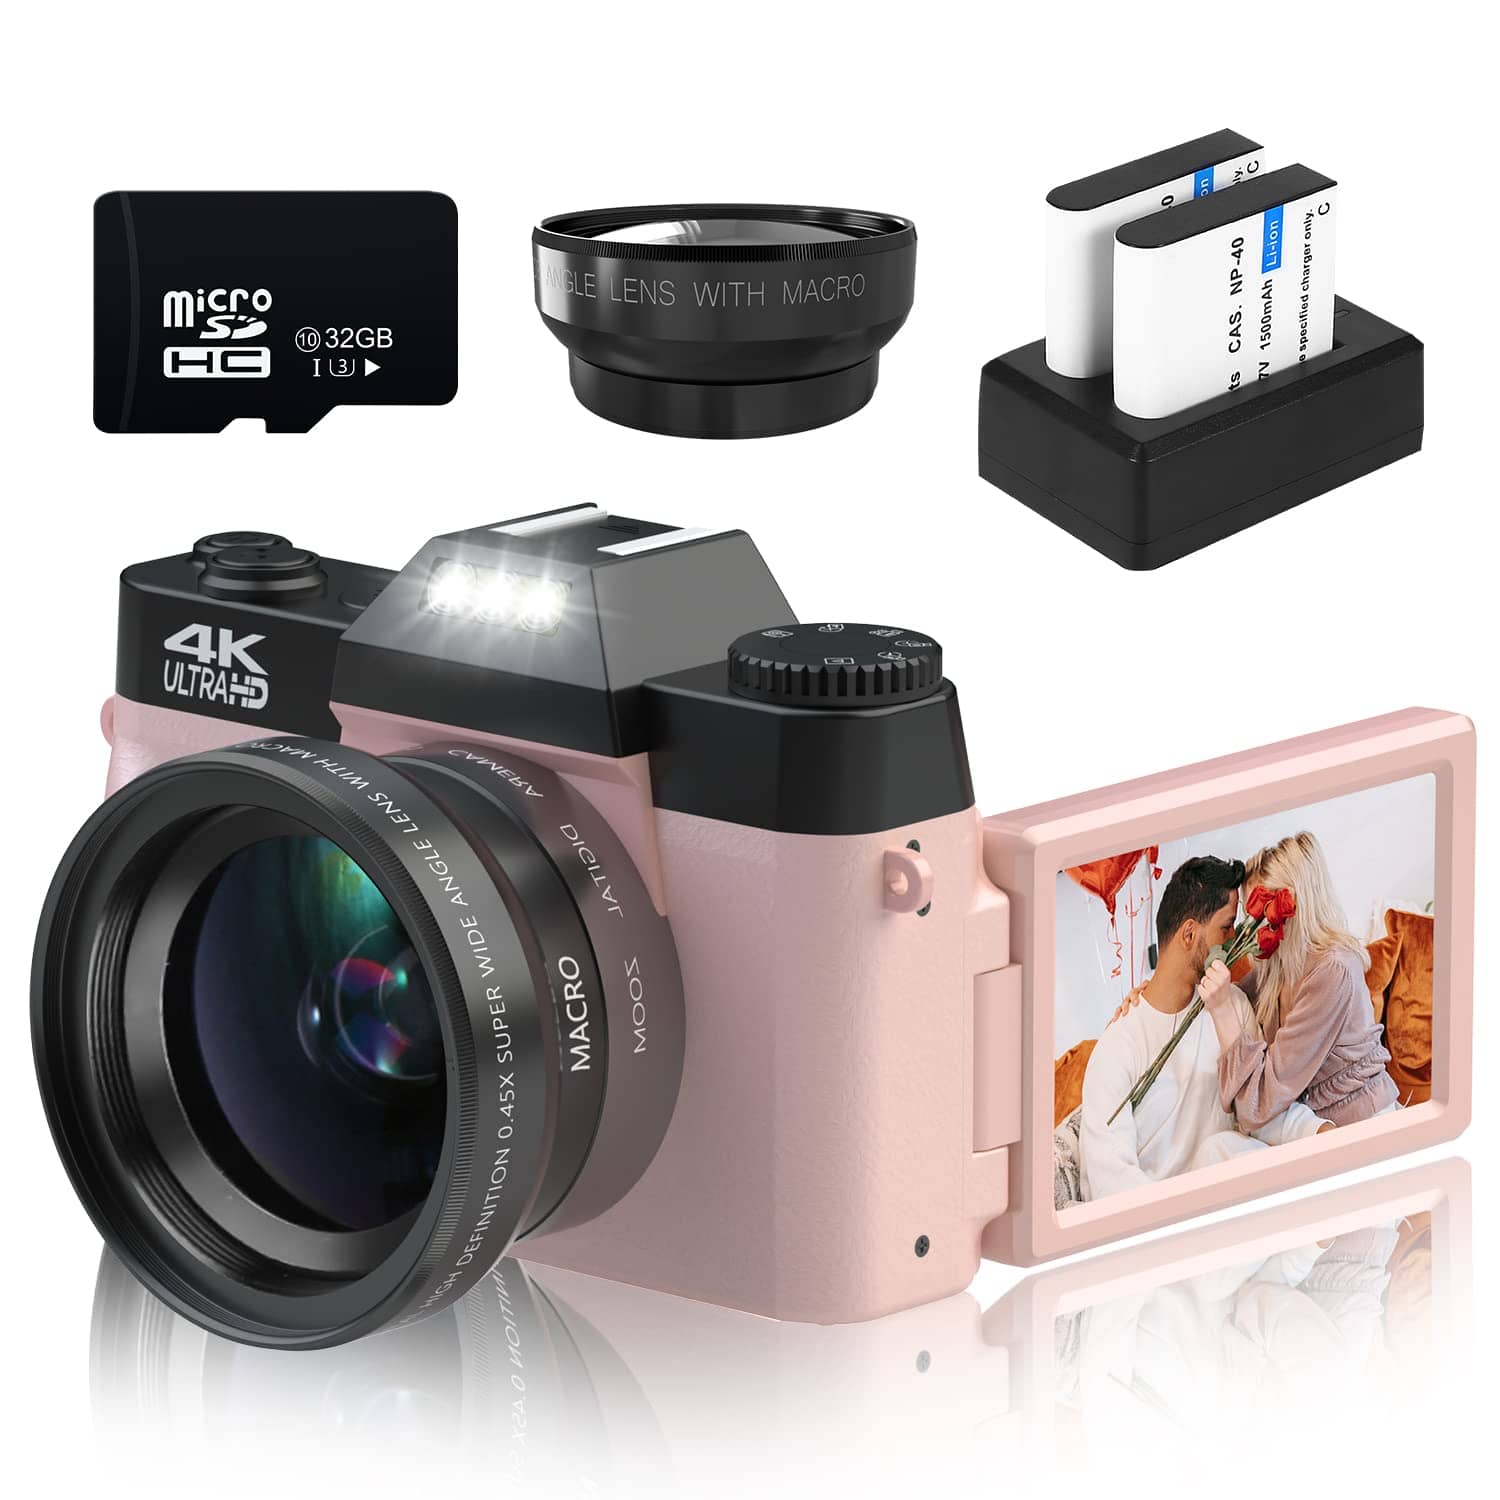 You are currently viewing Digital Cameras for Photography, 4K 48MP Vlogging Camera 16X Digital Zoom Manual Focus Rechargeable Students Compact Camera with 52mm Wide-Angle Lens & Macro Lens, 32G Micro Card and 2 Batteries